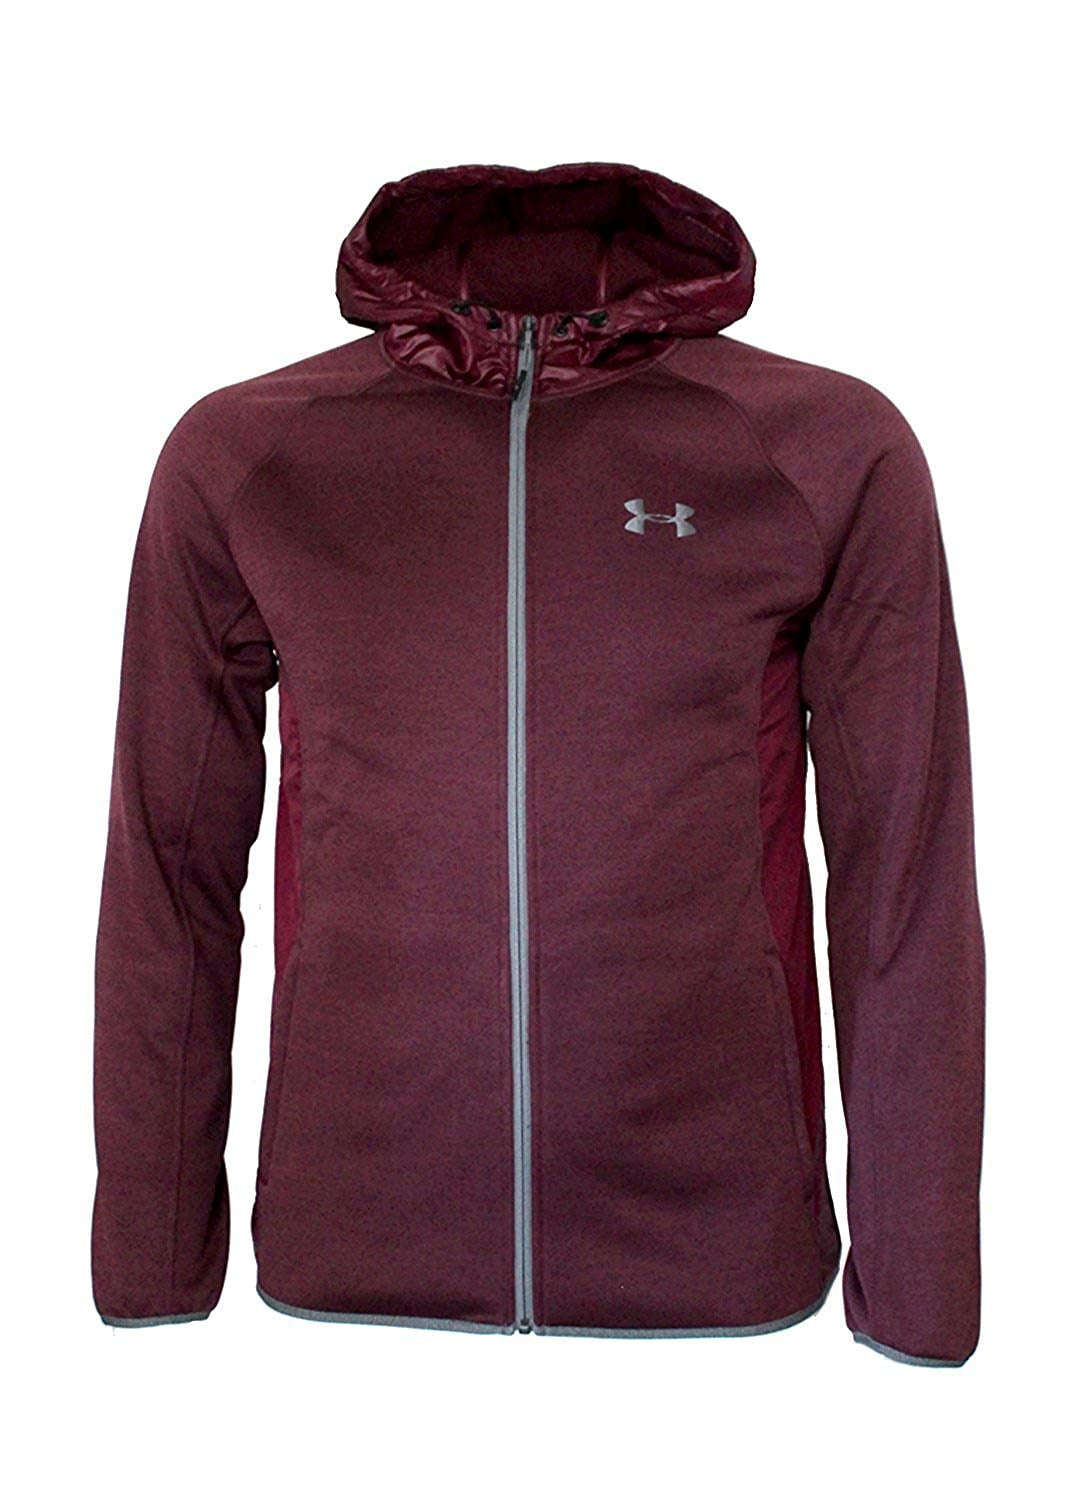 Under Armour Men's Storm Athletic Full Zip Hooded Light Jacket Size M ...